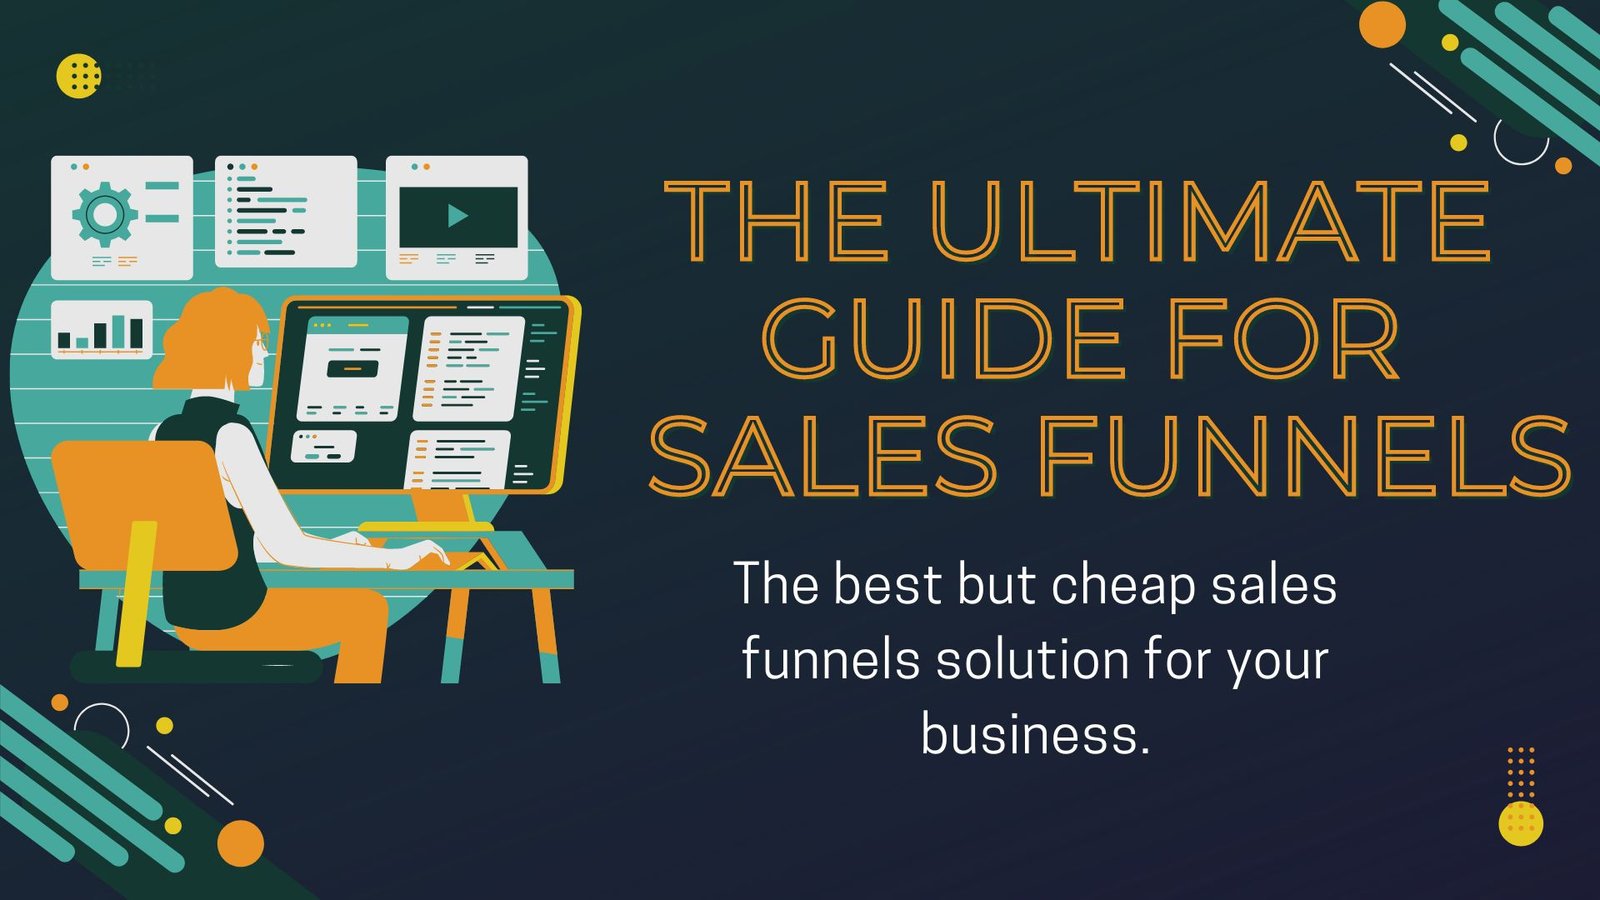 Affordable sales funnels for lead generation